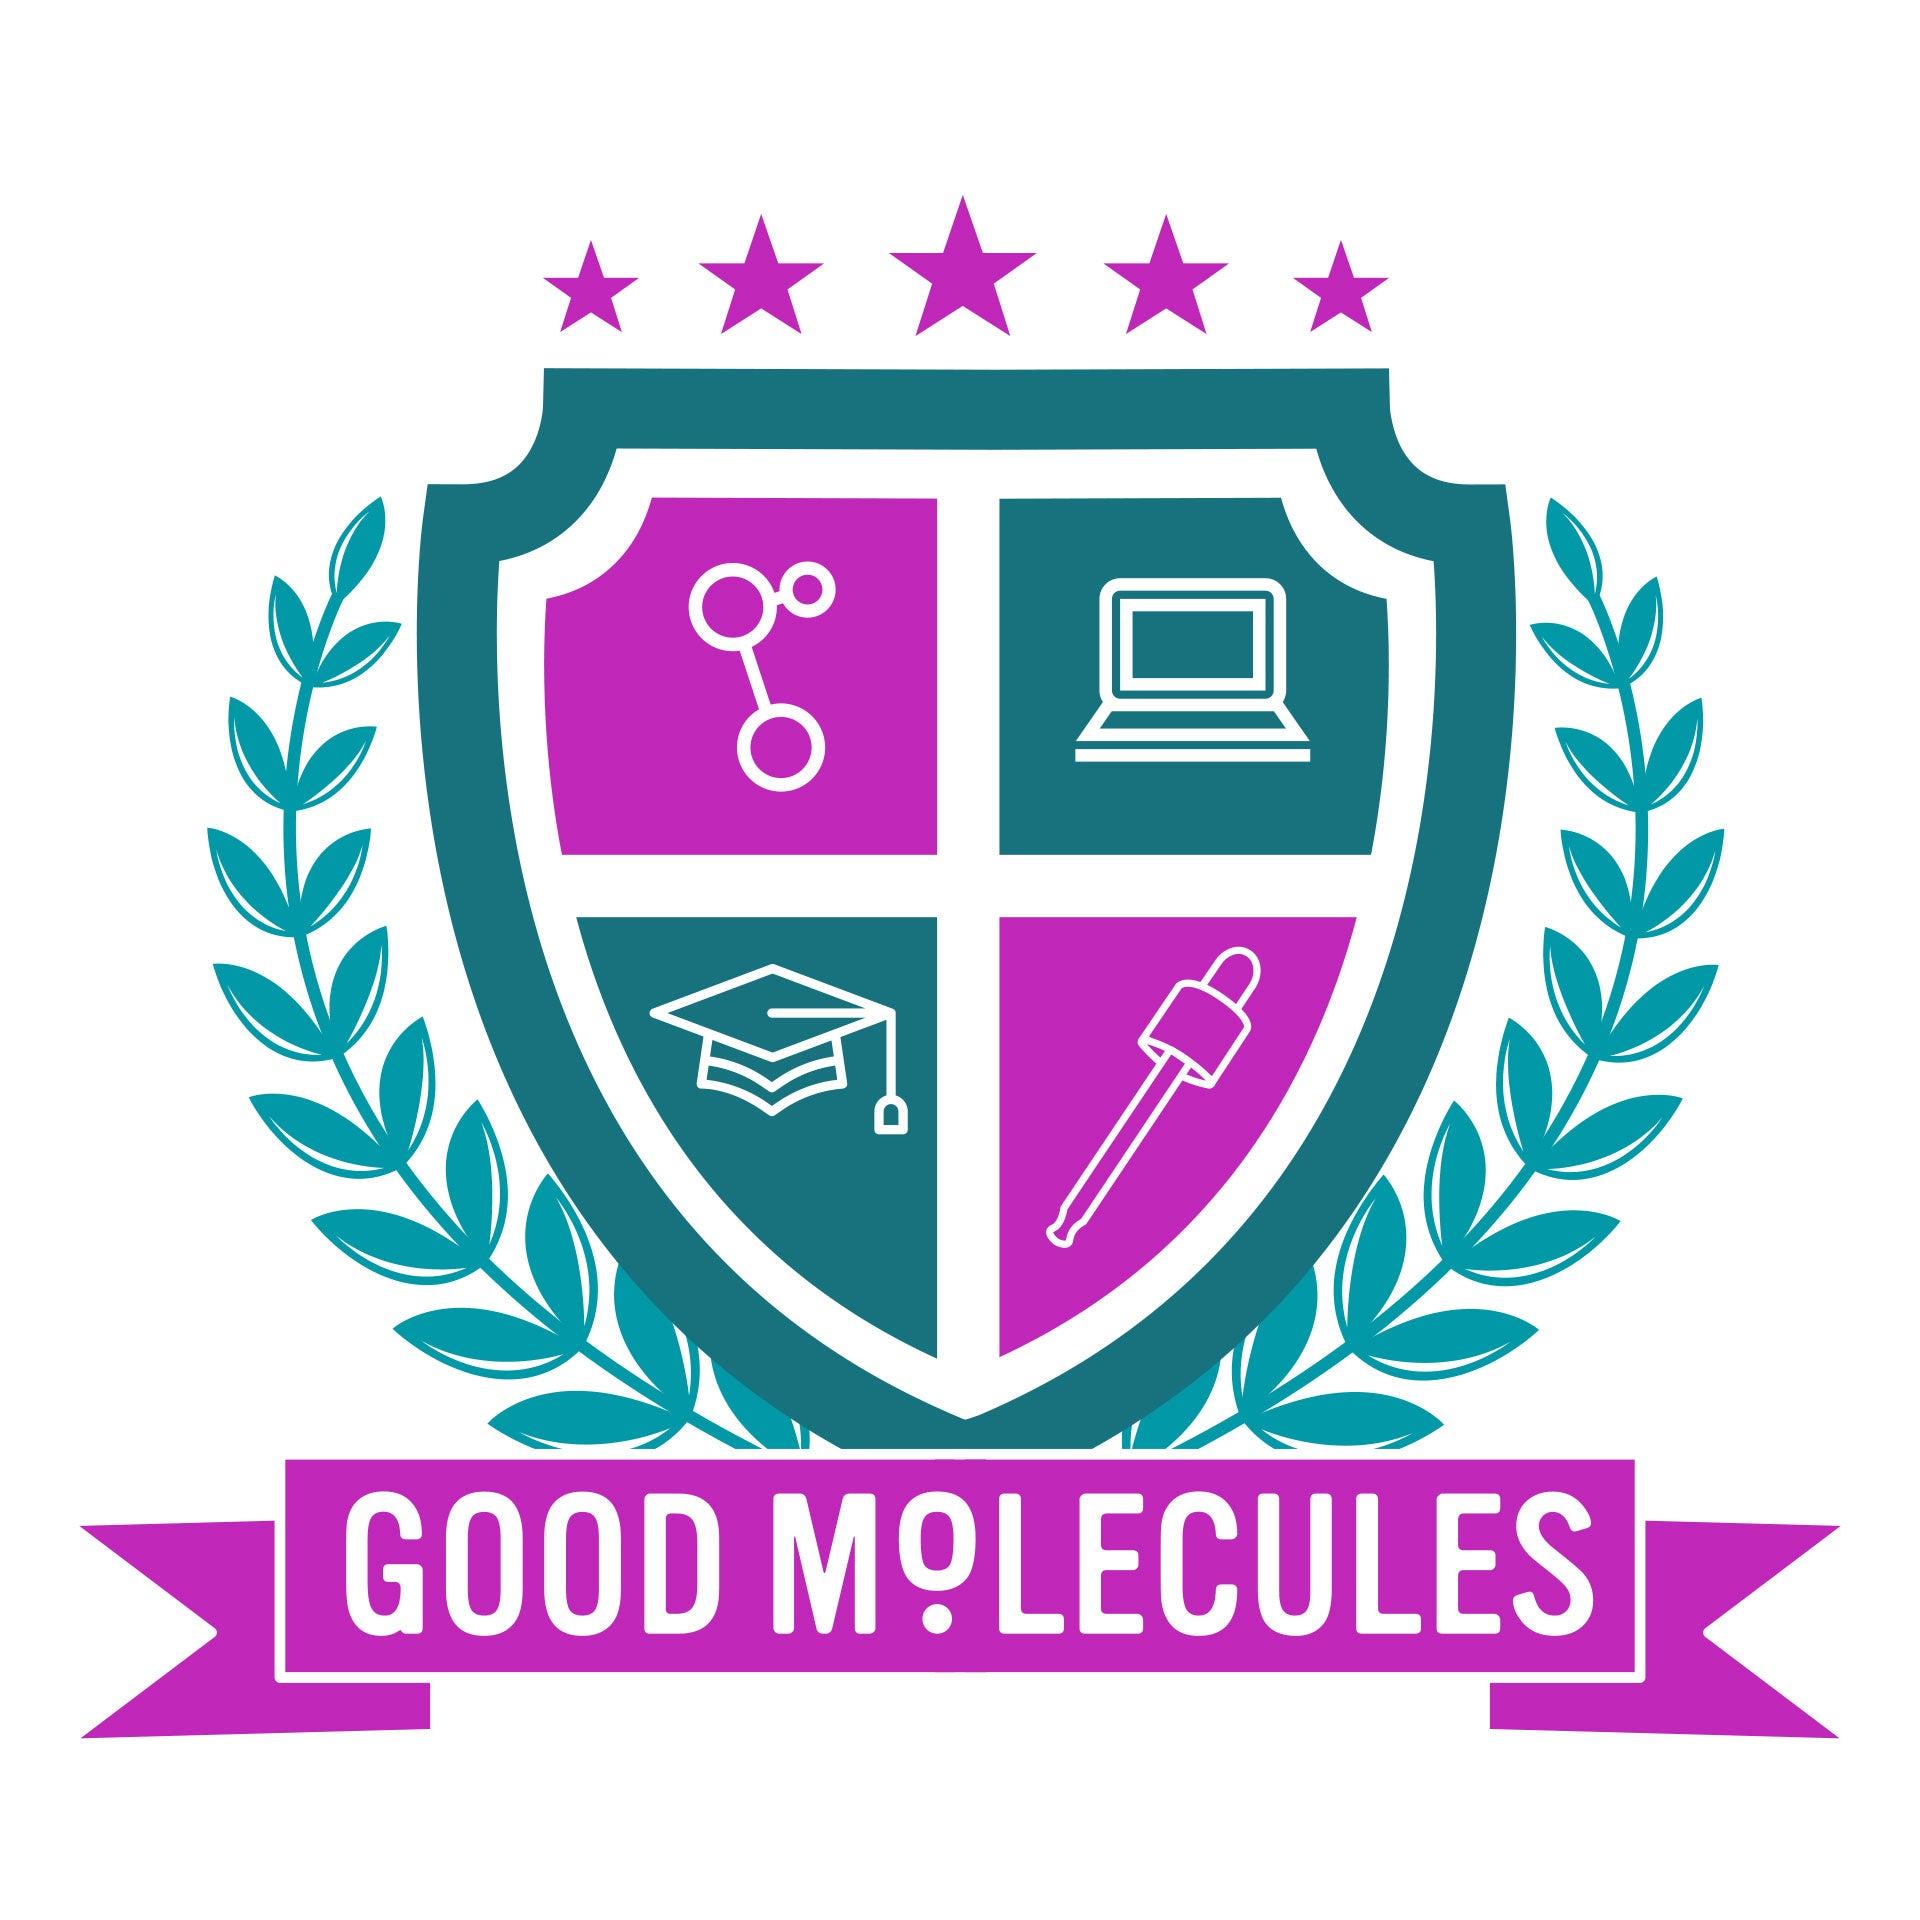 Good Molecules is coming to Texas Tech University!